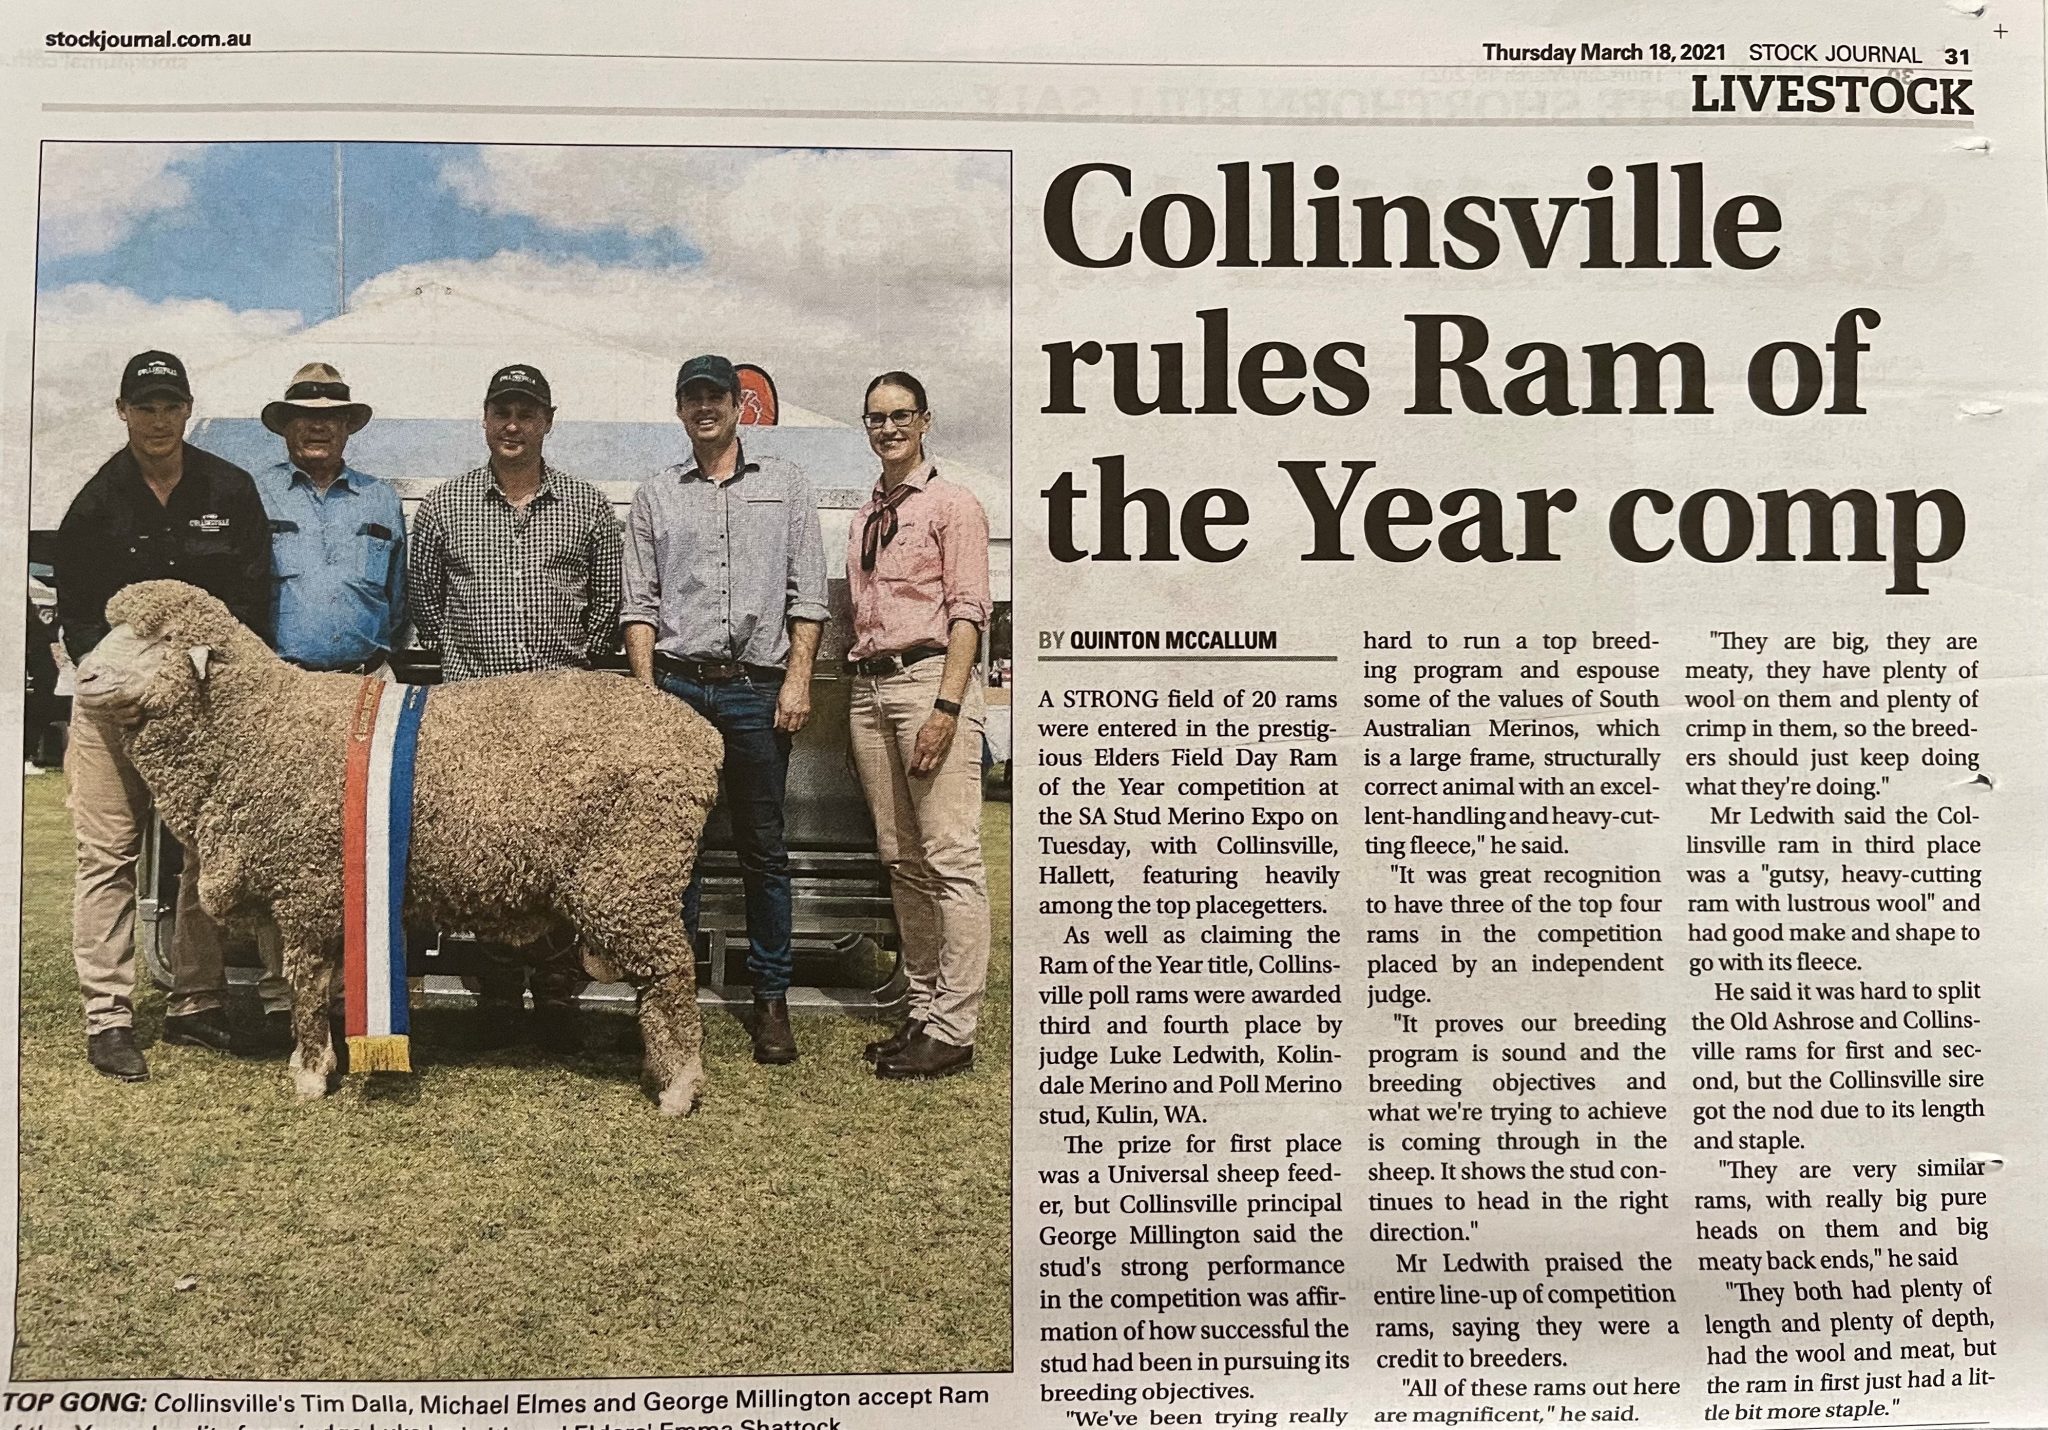 SA Merinos Field Day Burra 2021 Ram of the Year (1st, 3rd & 4th)